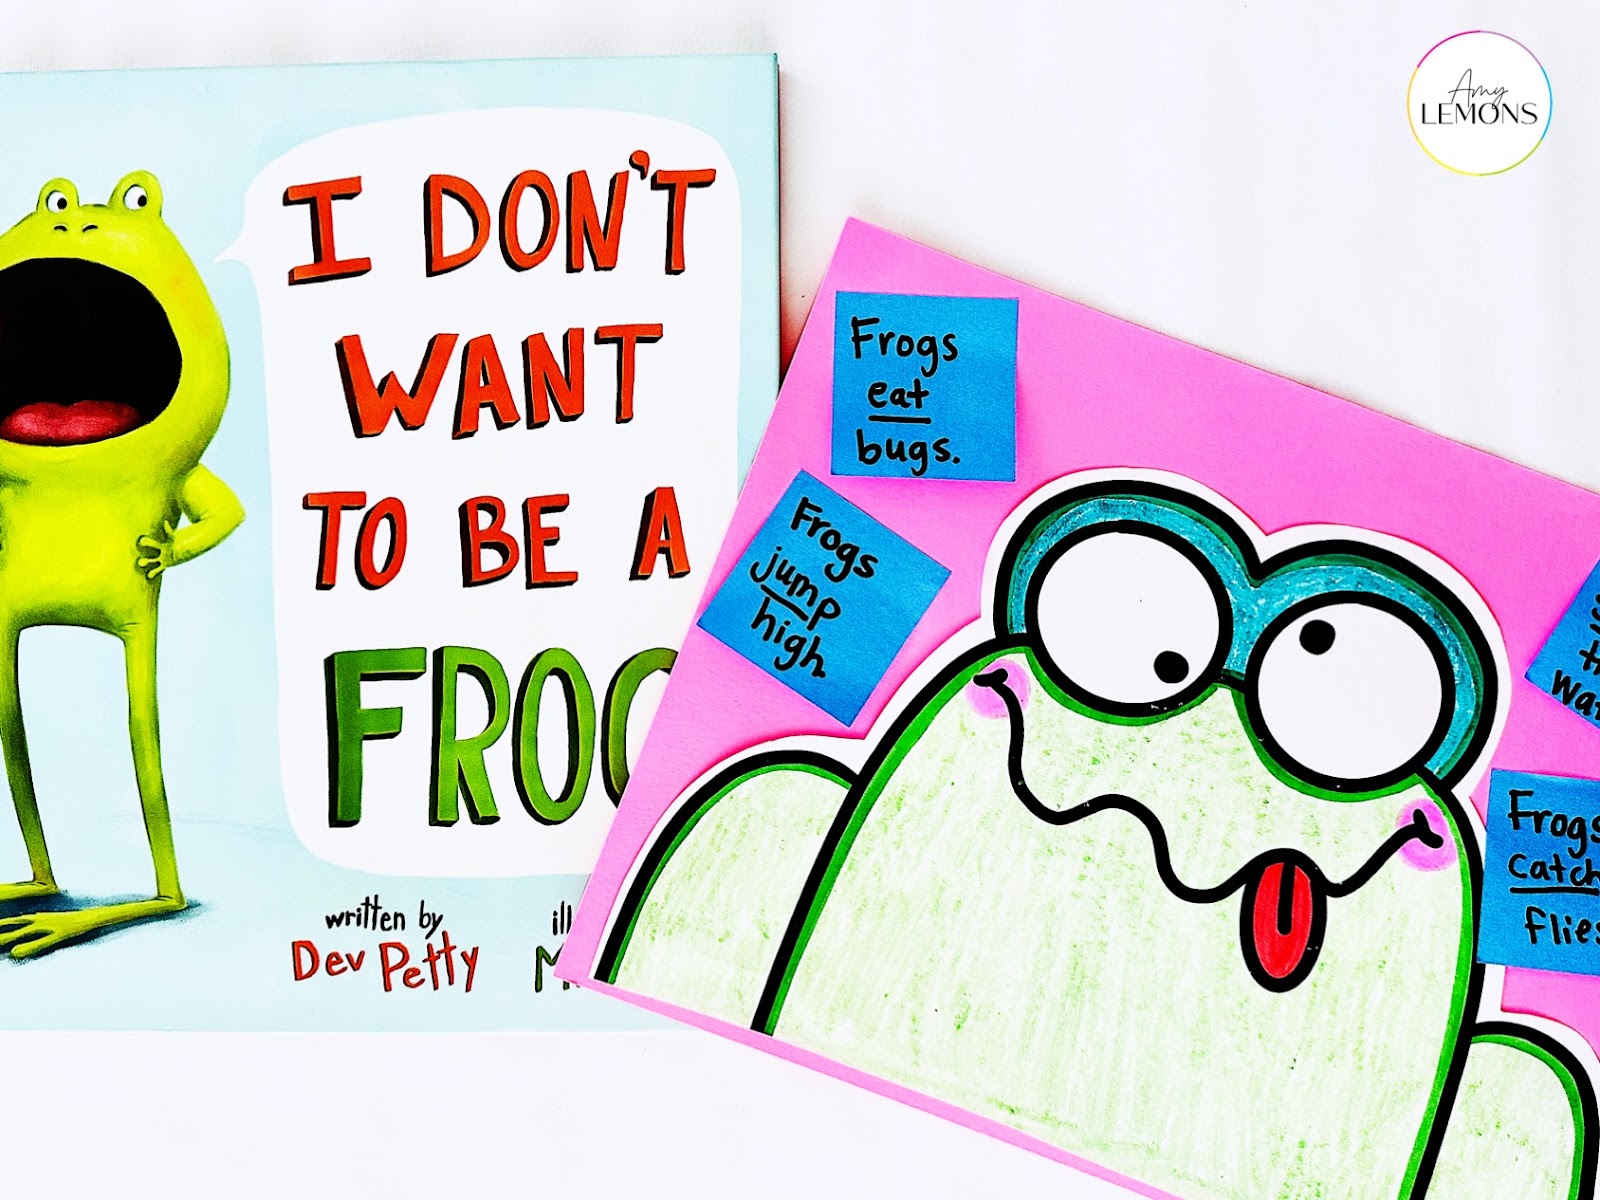 The book I Don't Want to be a Frog with a Frog directed drawing and a grammar activity.